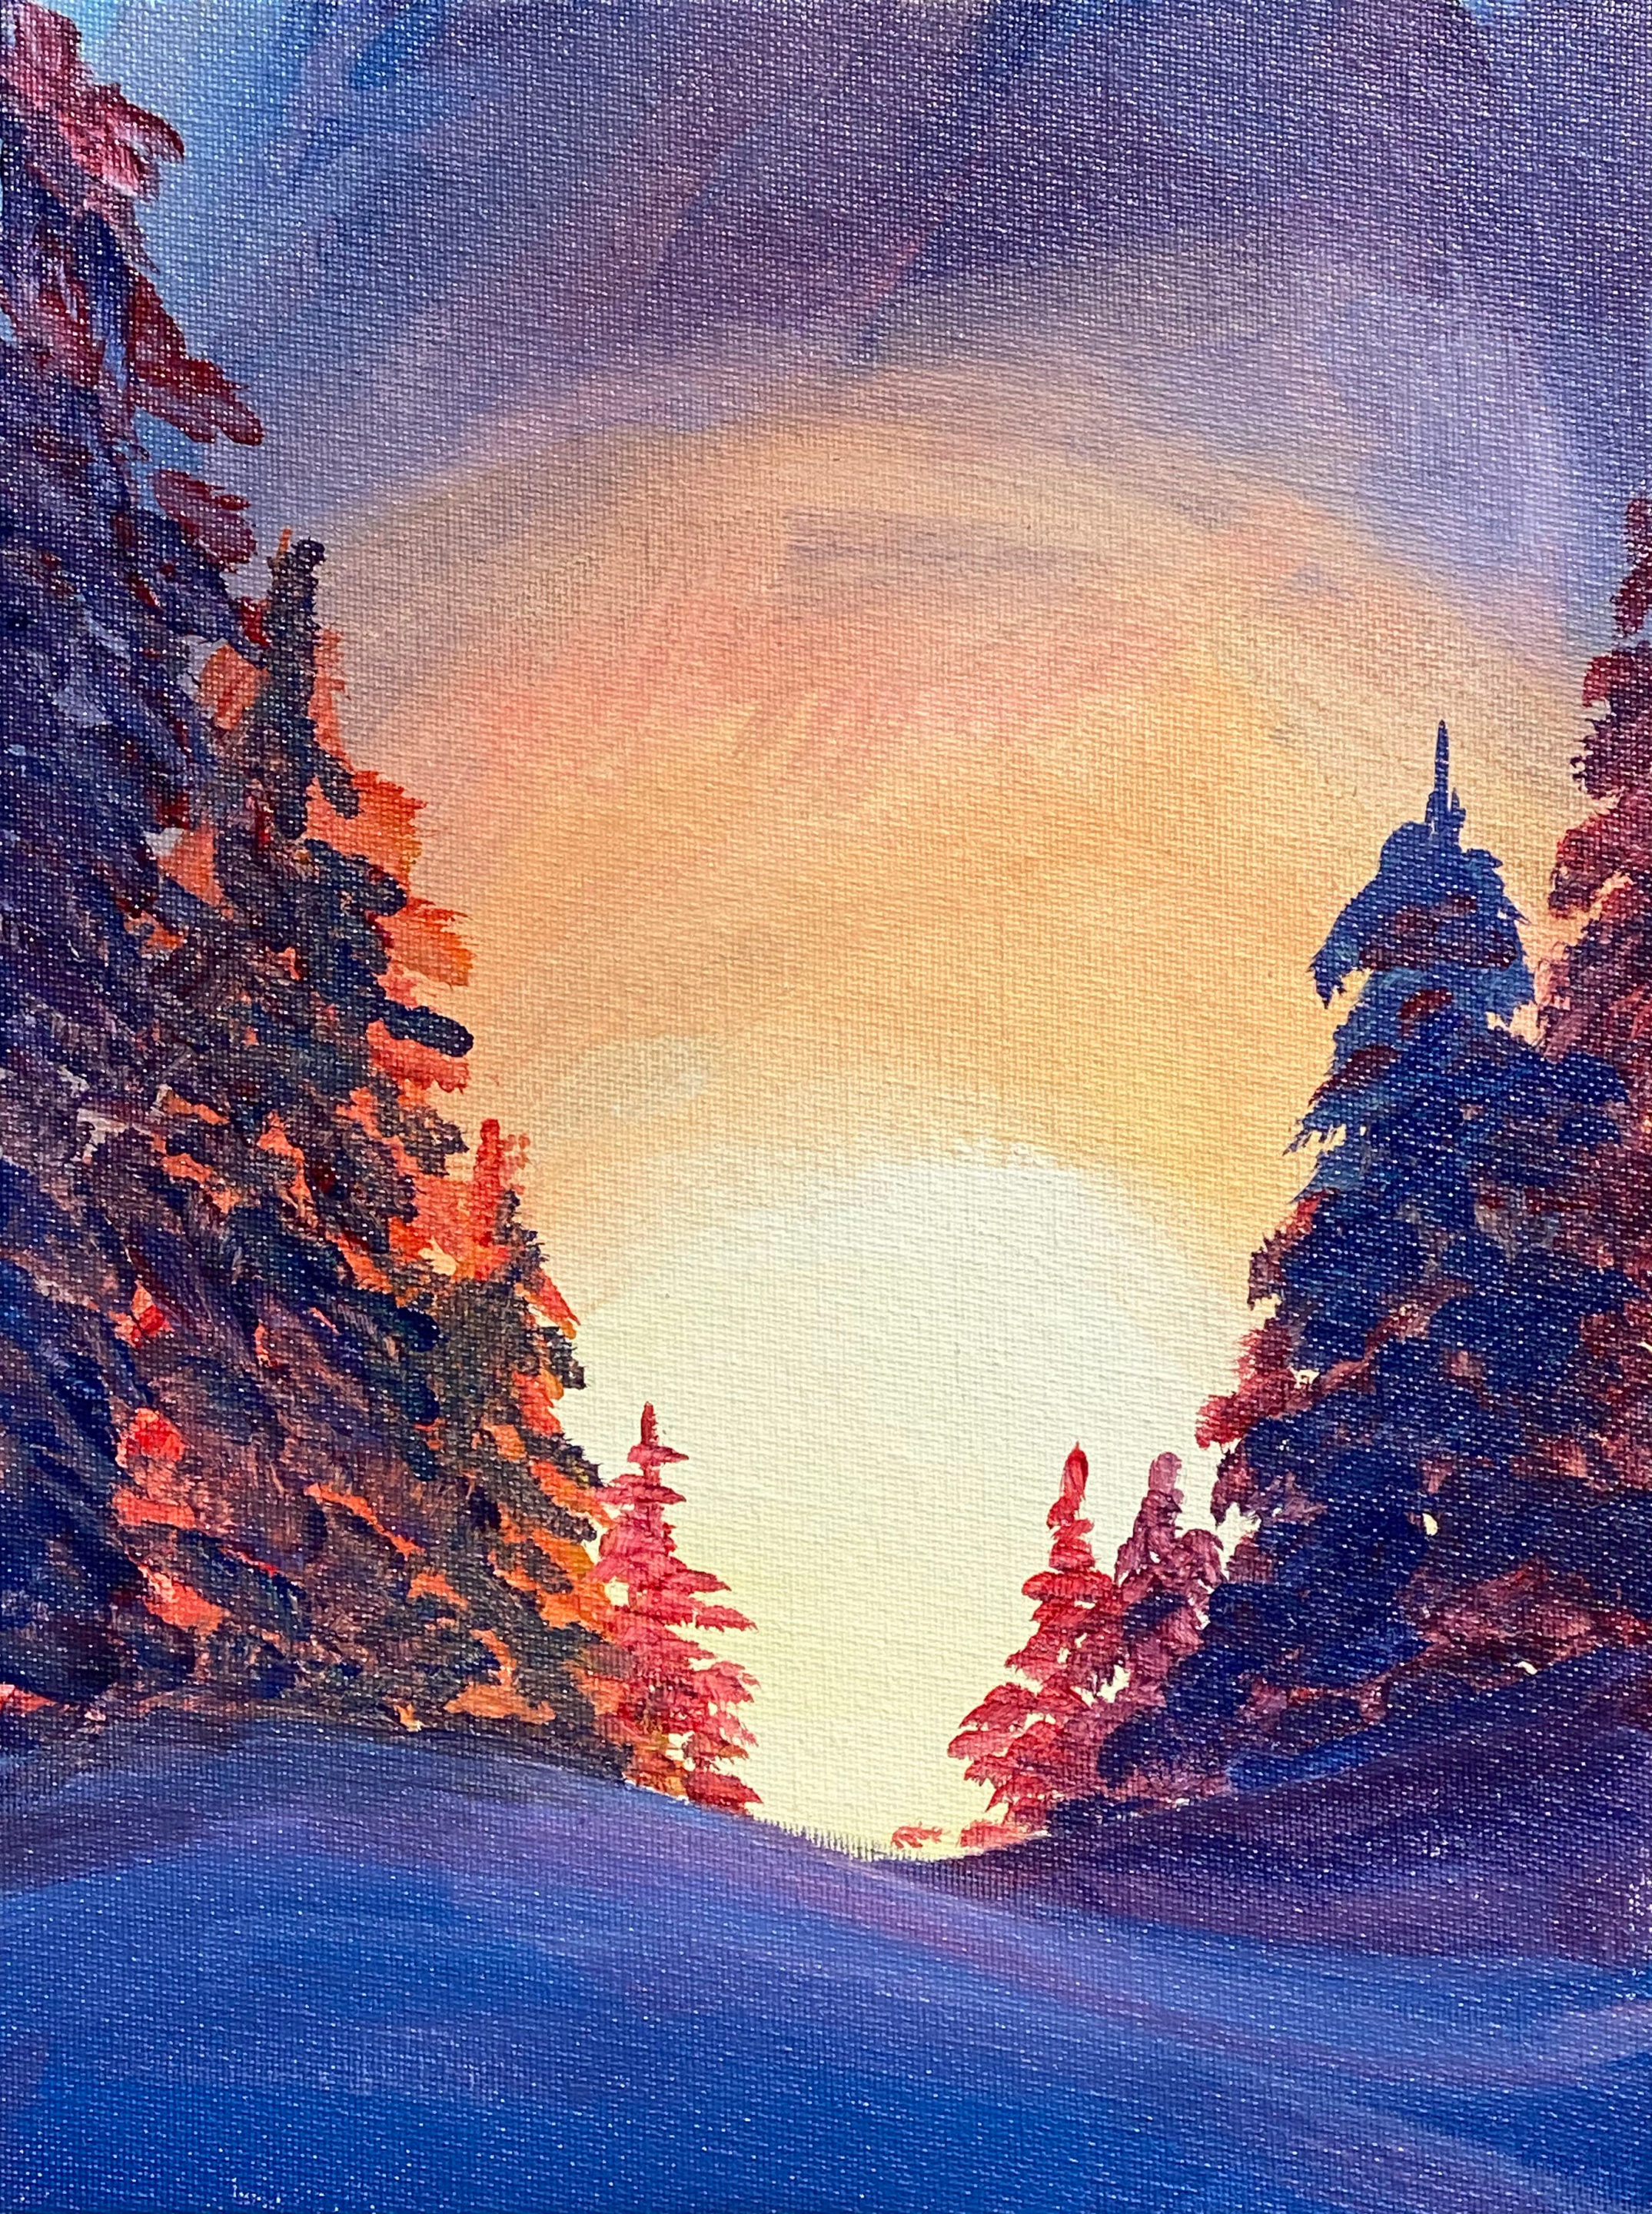 Sunset Through the Pines from Creatively Uncorked http://creativelyuncorked.com/